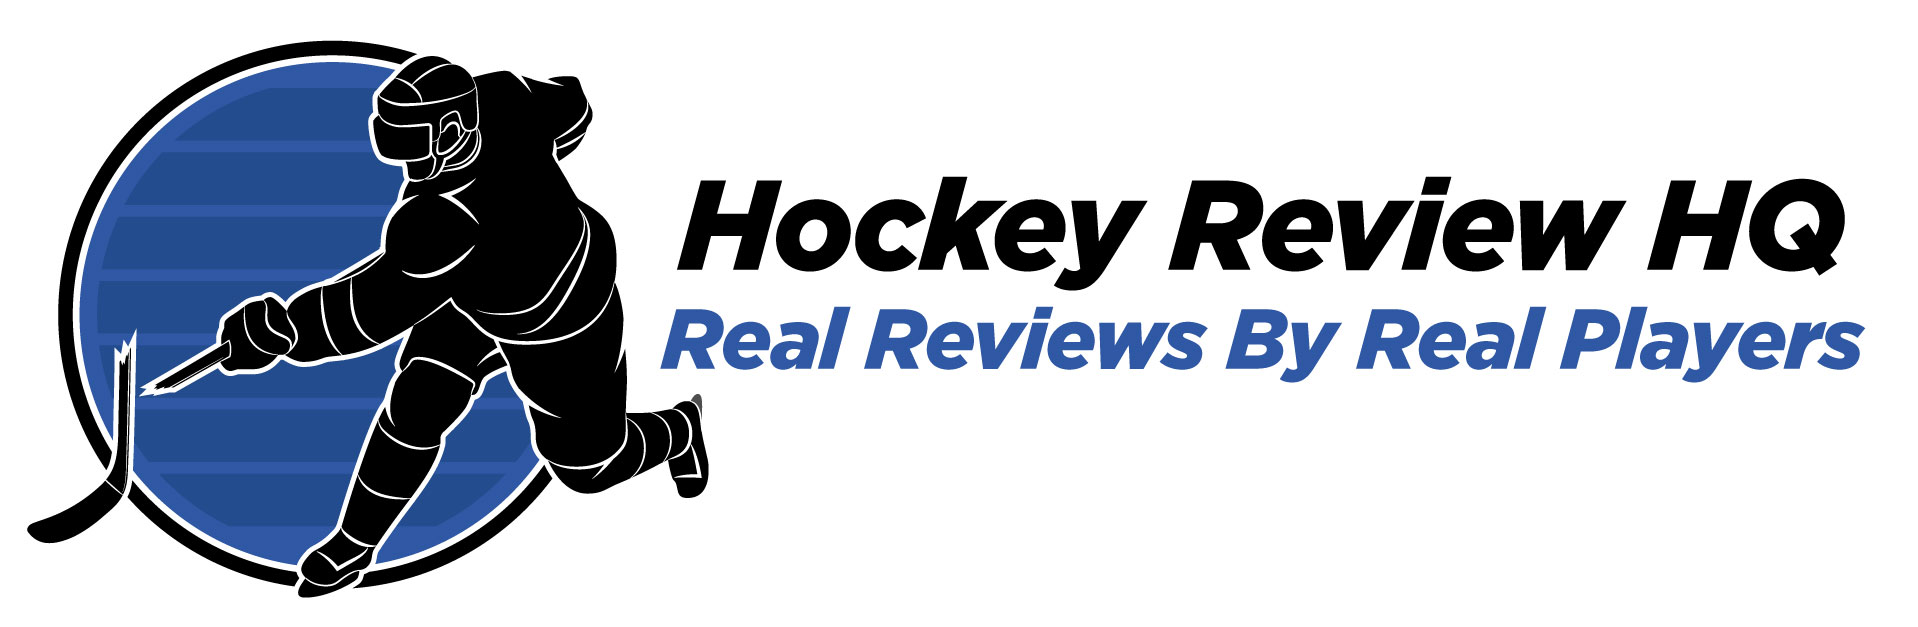 Hockey Review HQ